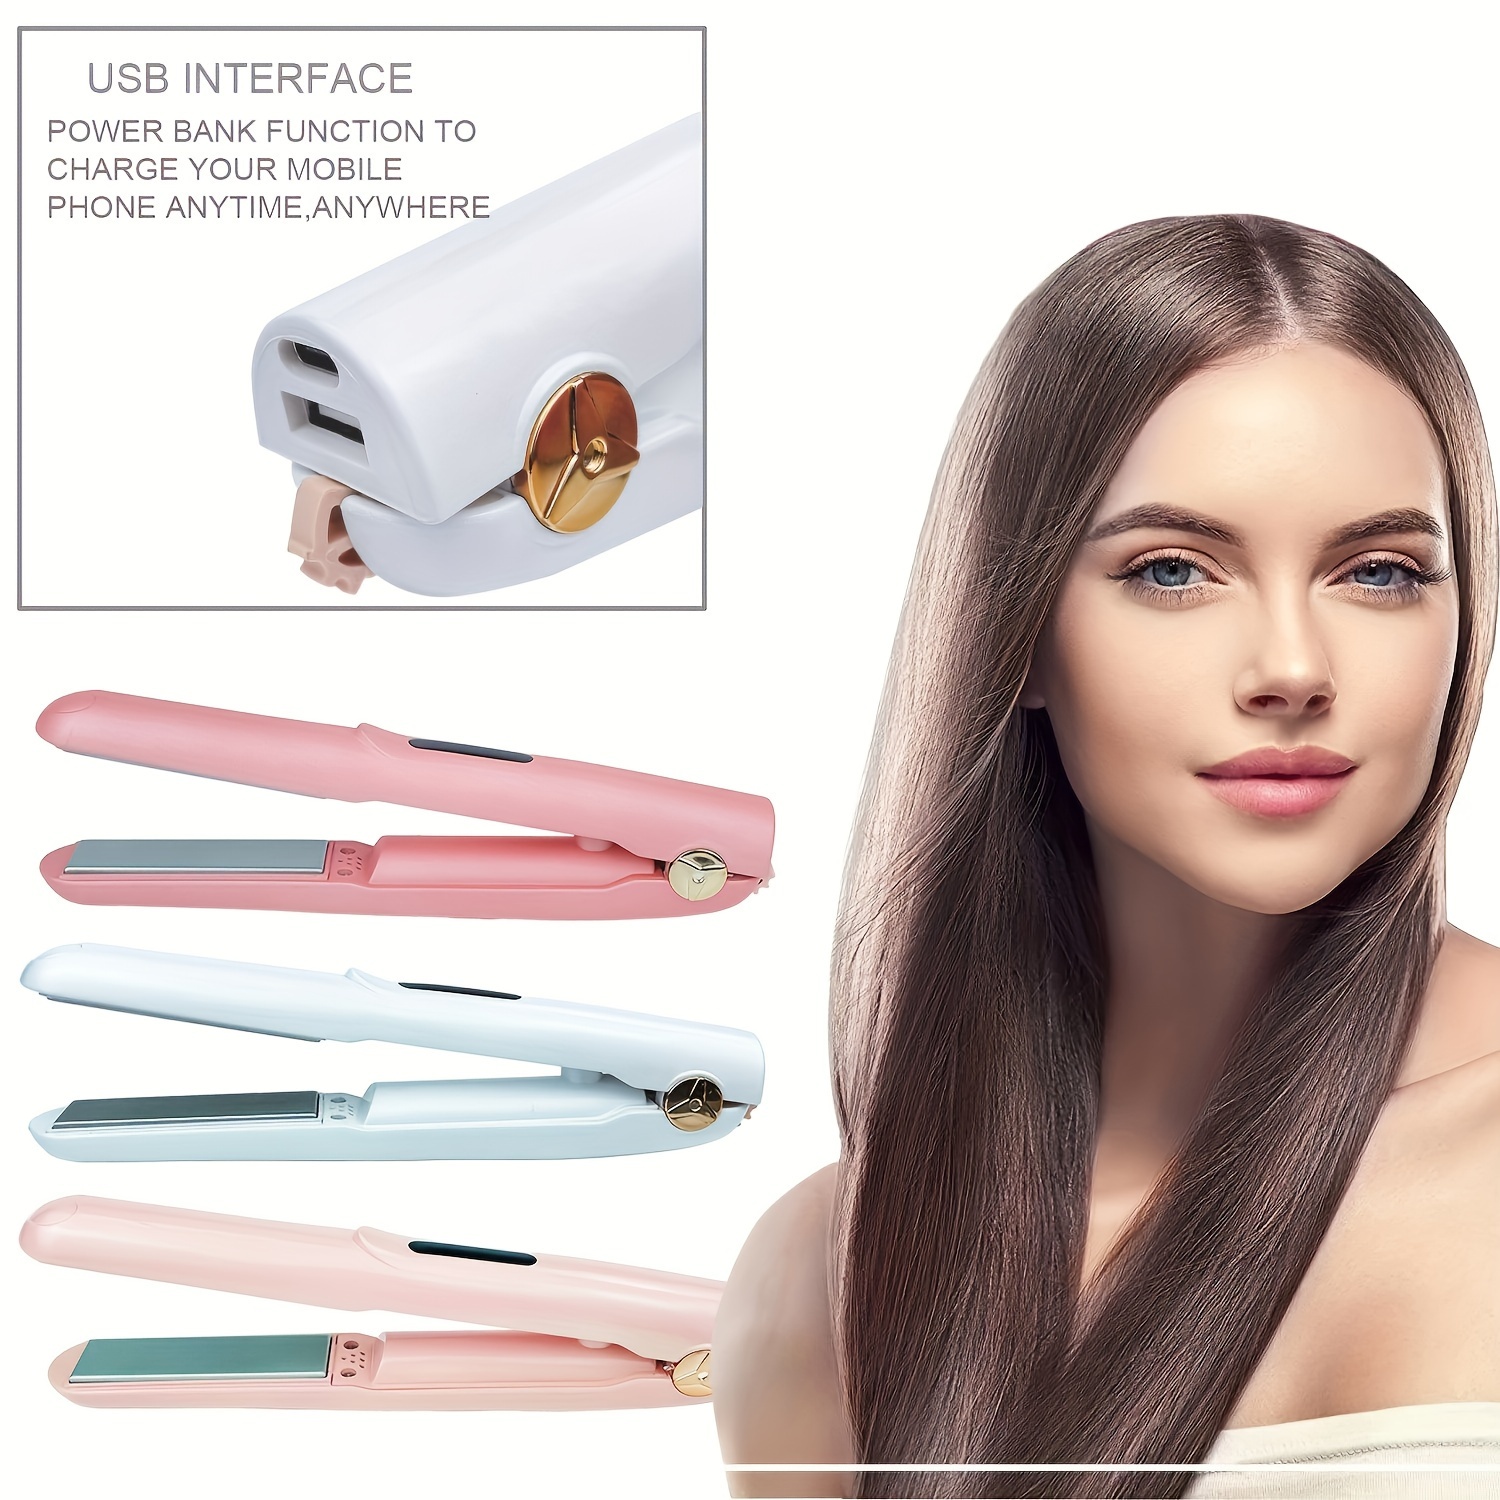 

Portable 2-in-1 Hair Straightener And Curler With Usb Power Bank Function, Mini Cordless Flat Iron, Wireless Charging, Compact For Travel & Dormitory Use